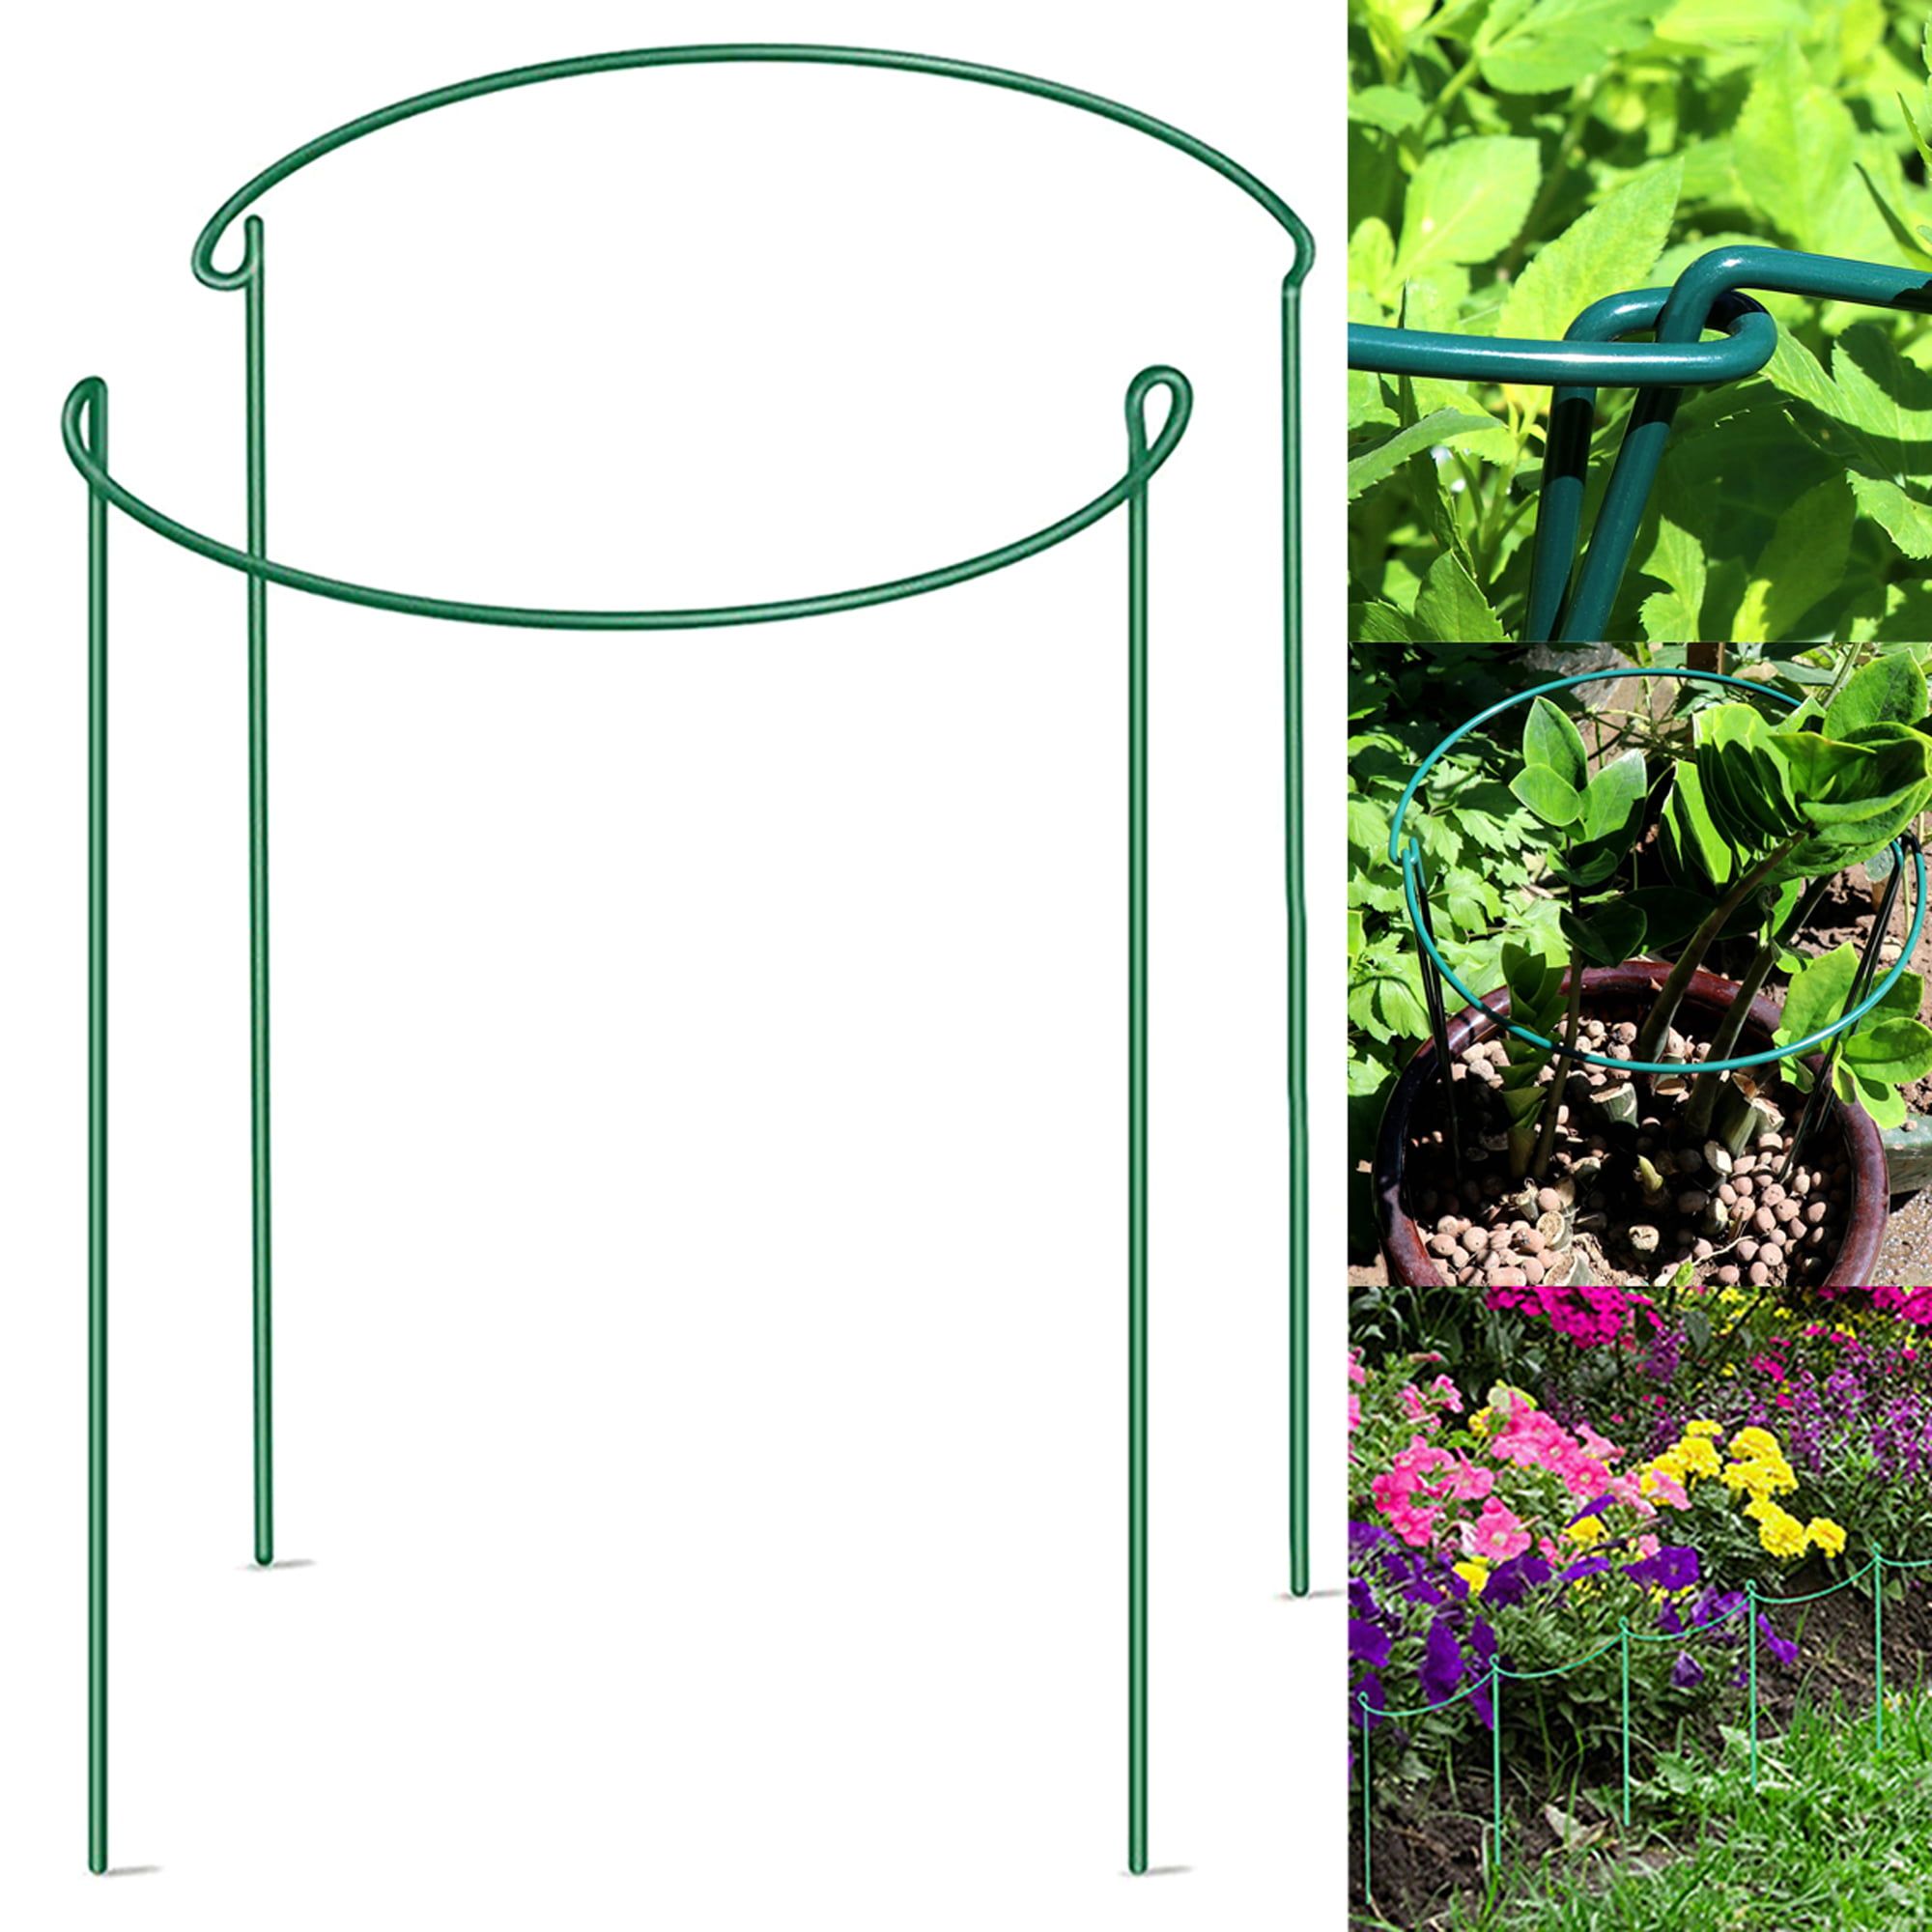 8x Plant Support Stake Metal Garden Plant Stake Green Half Round Support Ring 